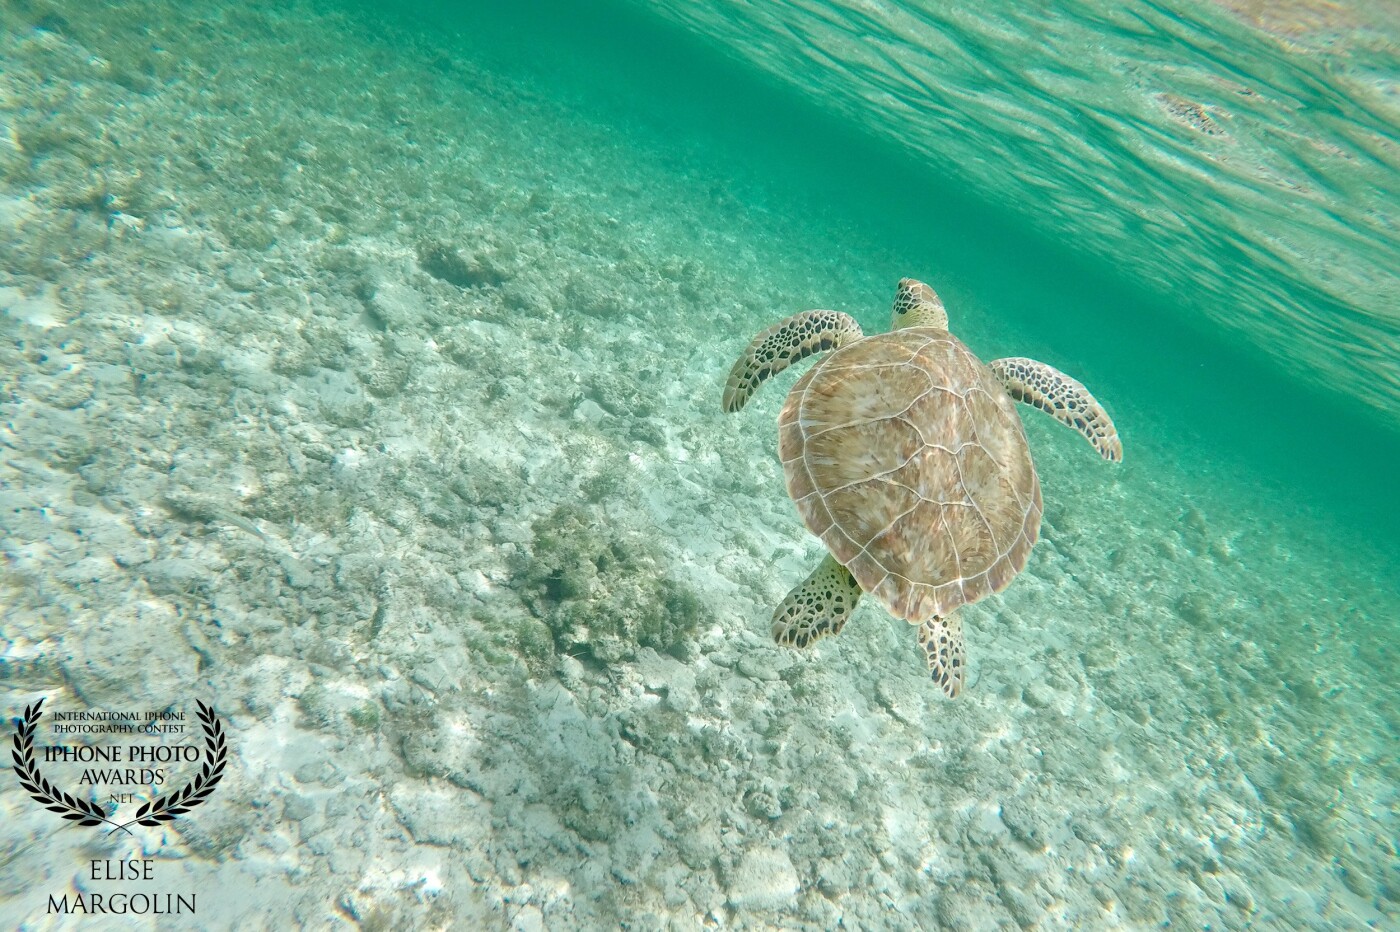 Sea Turtle Hunting in the Bahamas is the best! The calm tranquil waters - Serenity in the truest form! Waiting in position for the perfect moment- then SNAP! 